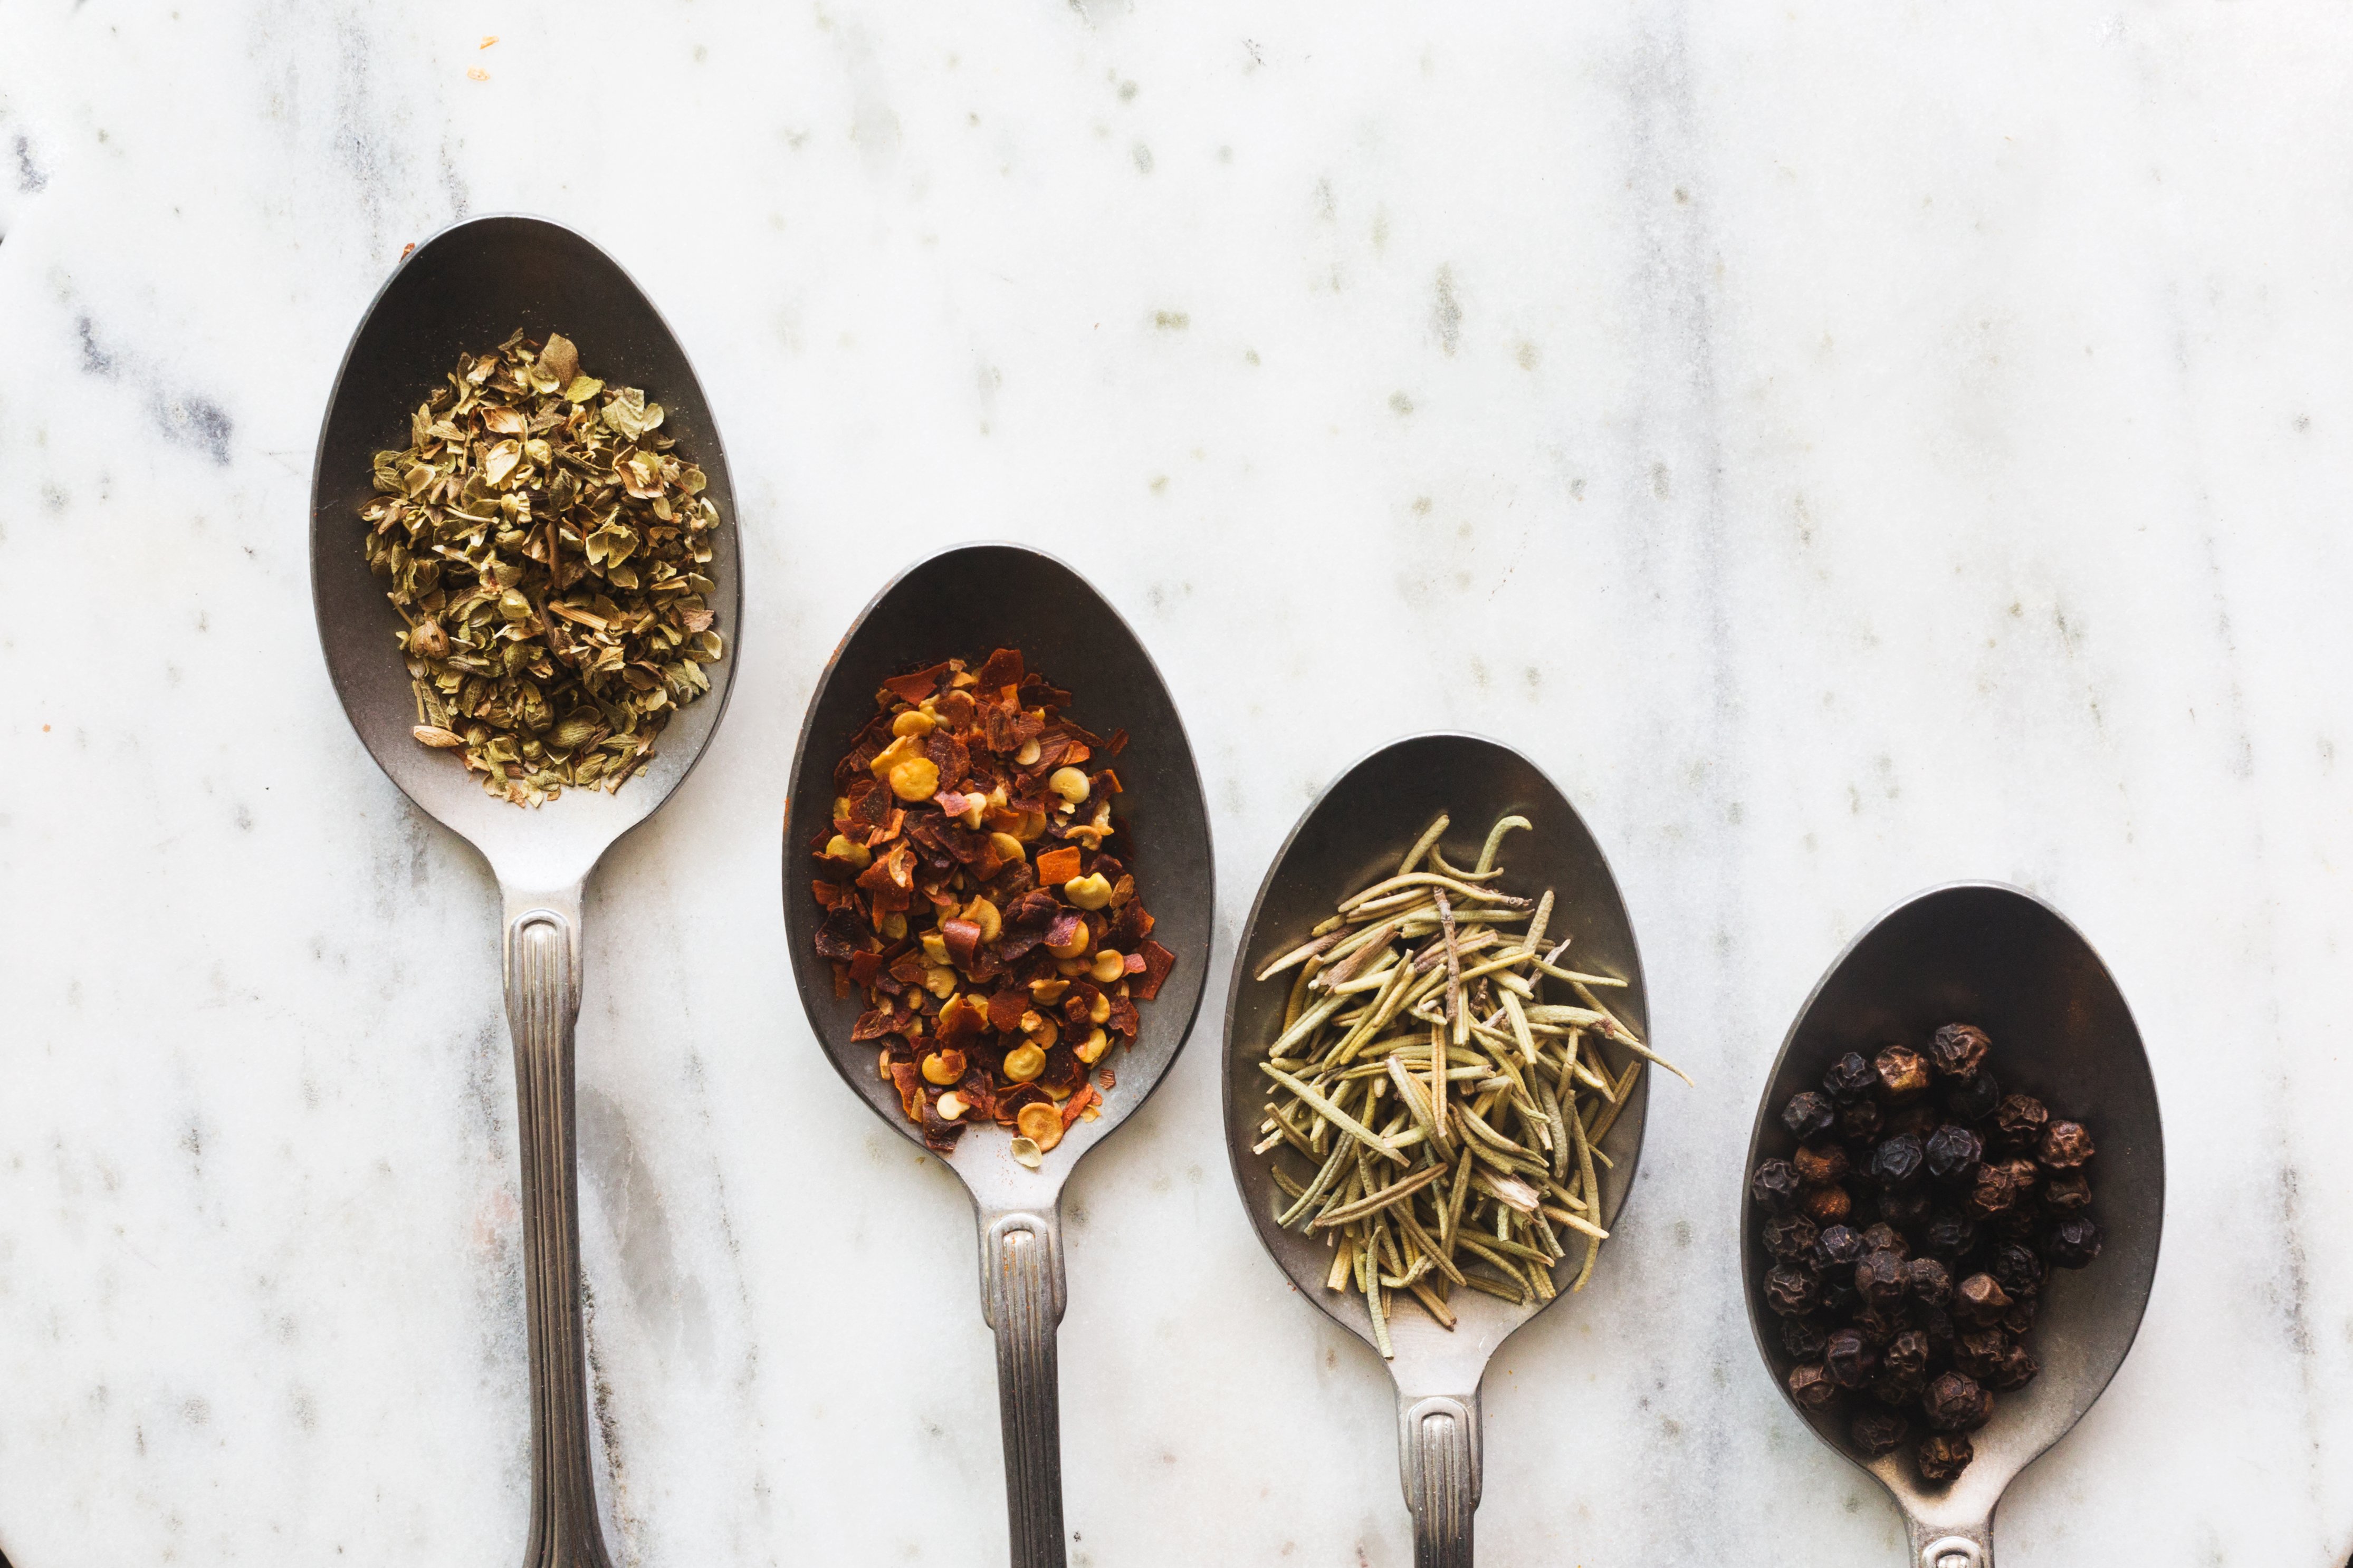 Spoons Full Of Spices by Sarah Pflug